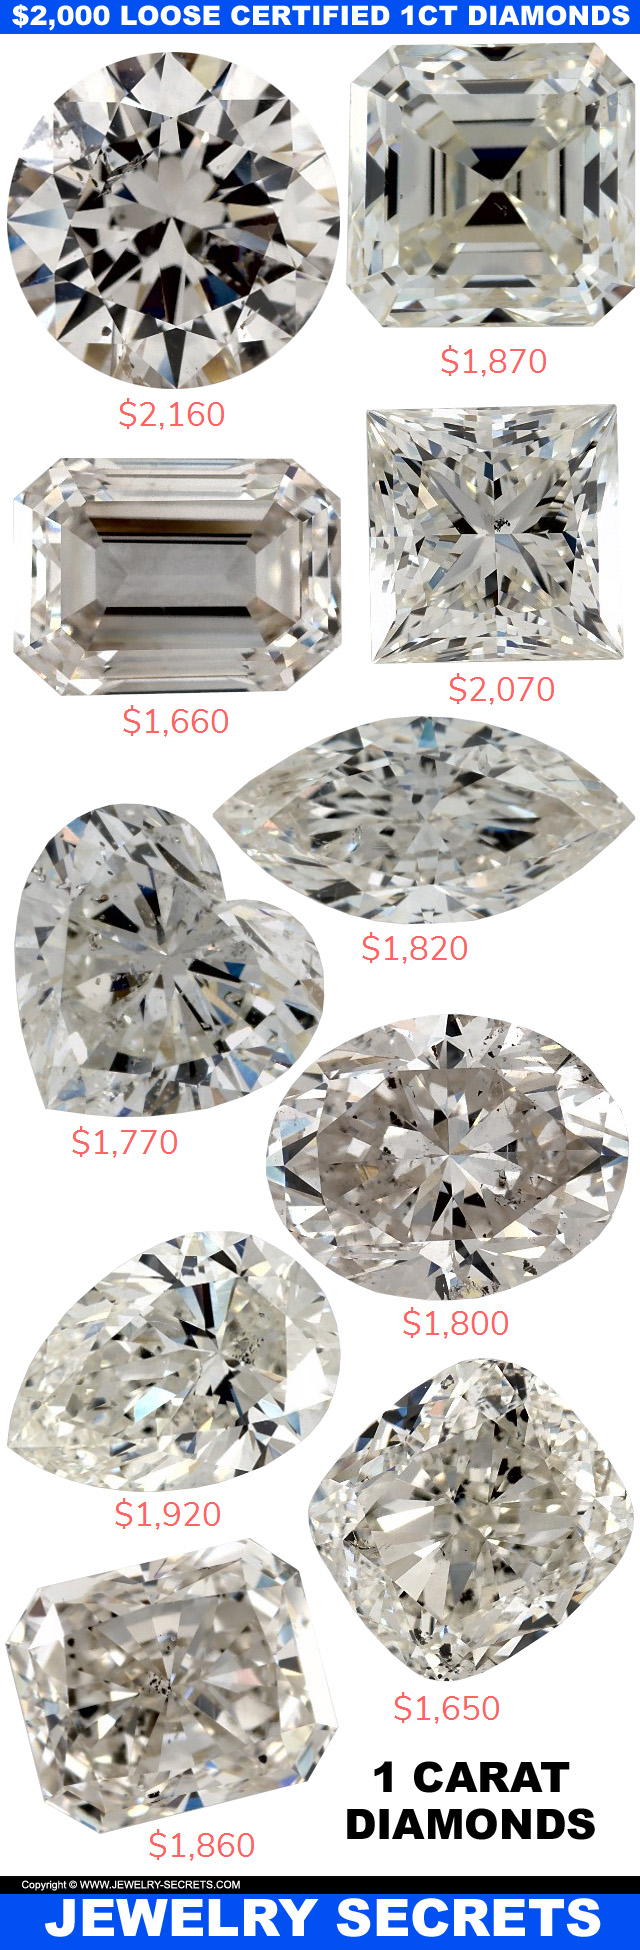 Loose Certified 1-00 Carat Diamonds For 2 Grand Or Less